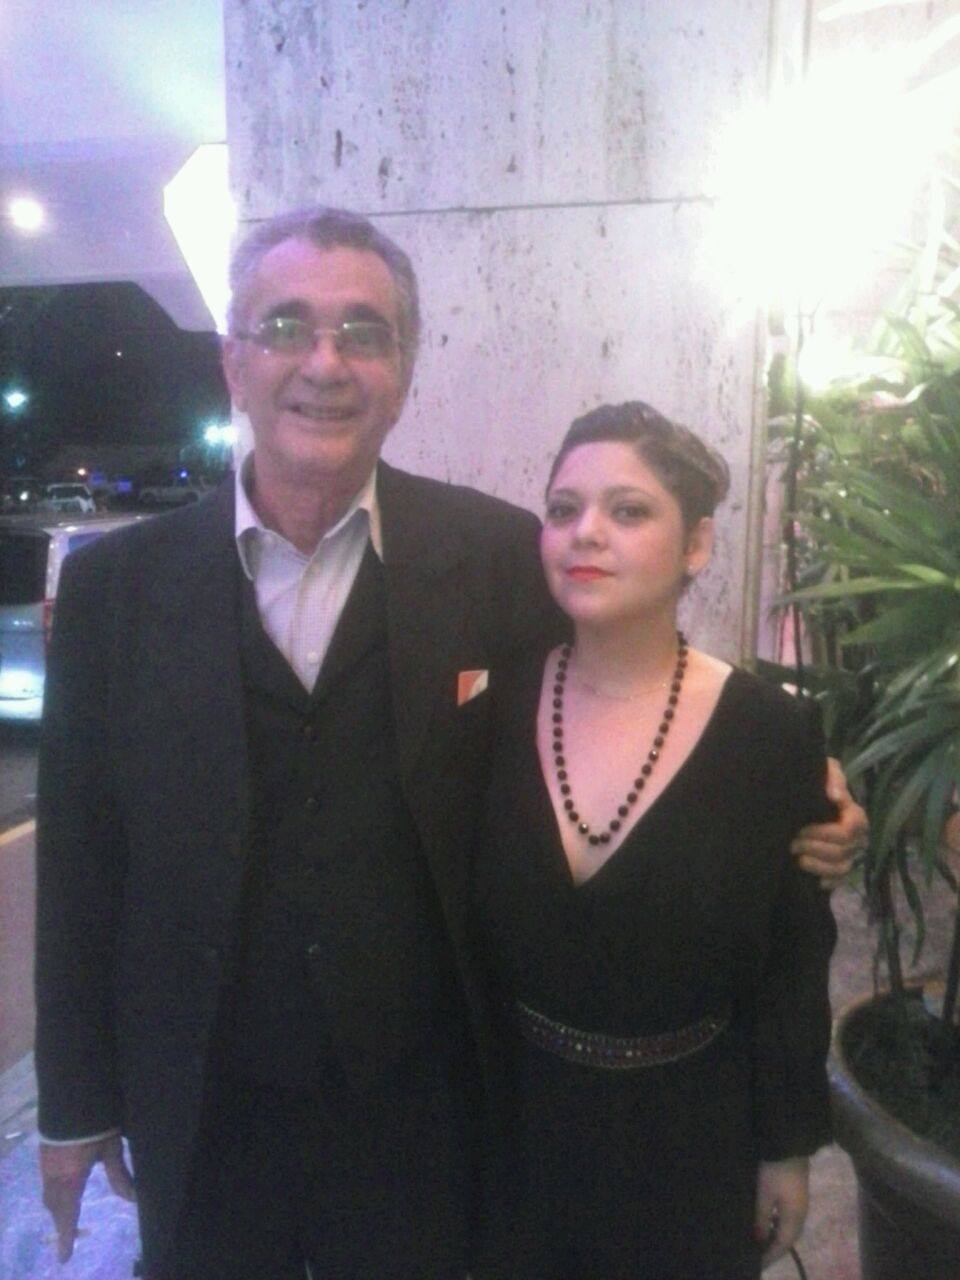 Gala Opening of the International Film Festival, FUNGLODE 2014 With the director and actor Pericles Mejia